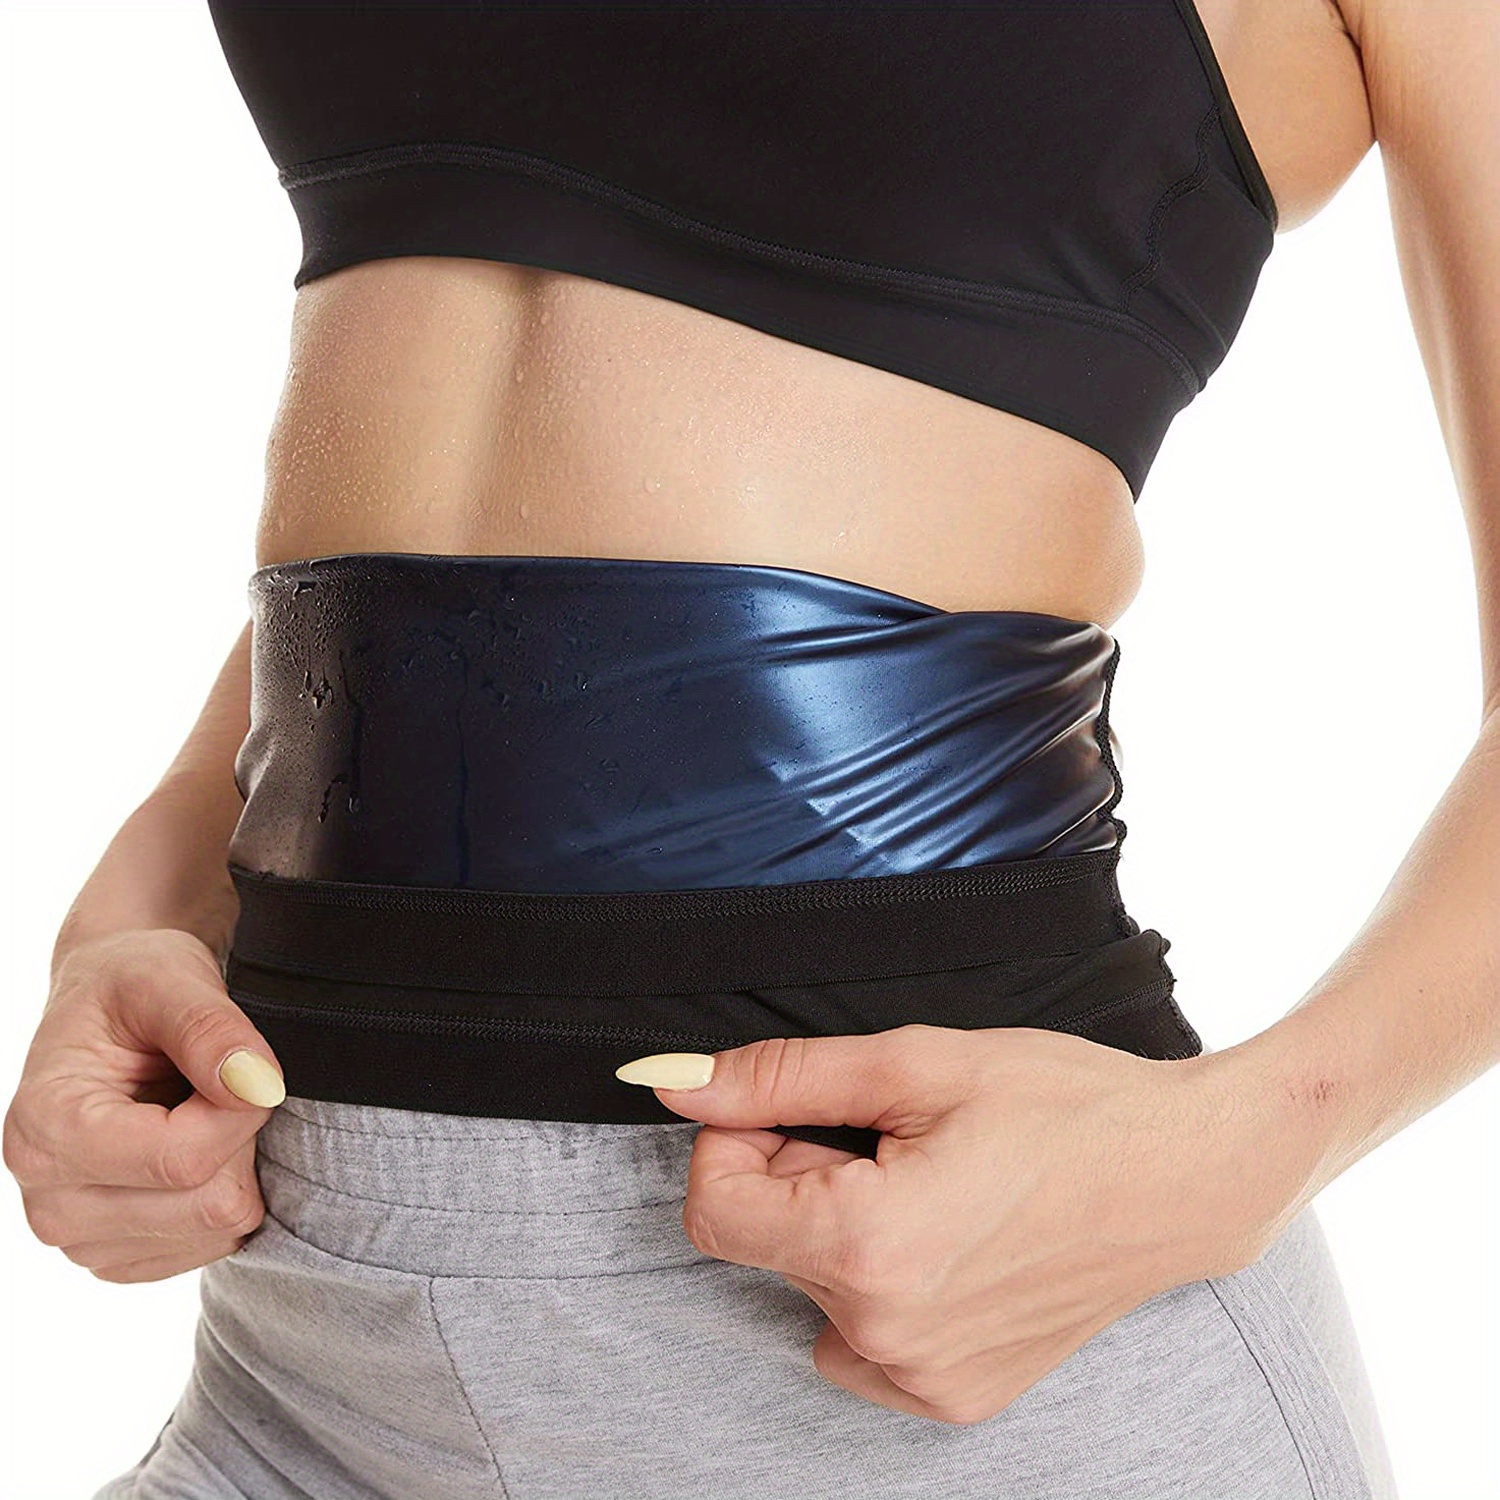 How To Reduce Waist Size FAST (Low Impact)